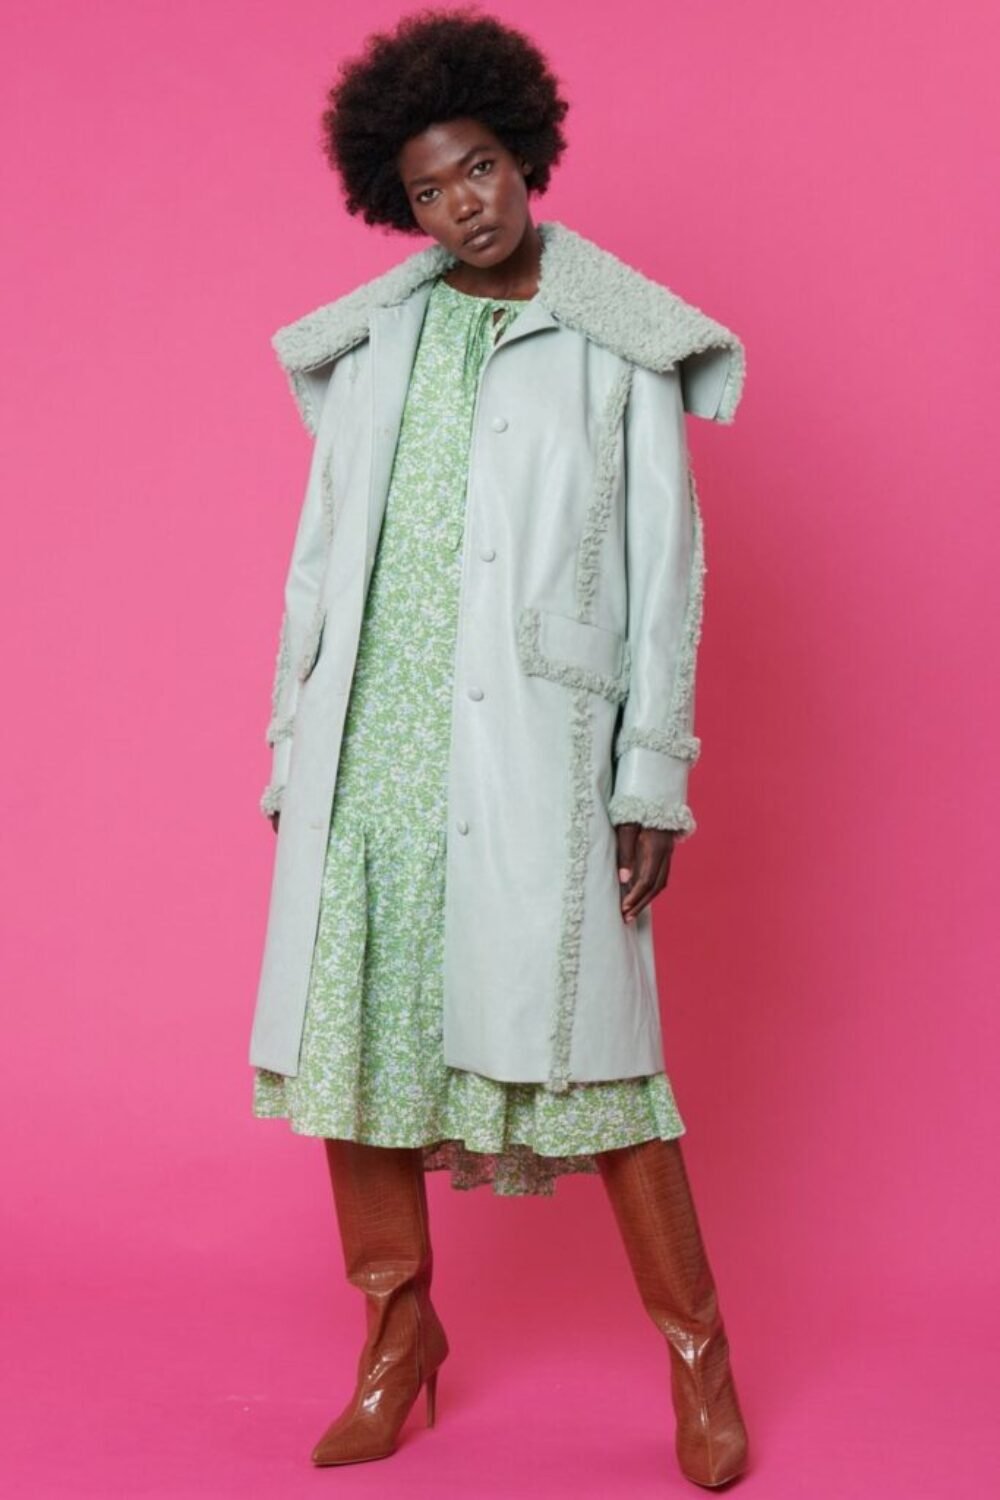 Shop Lux Faux Shearling and Faux Leather Aviator Style Trench in Mint Green and women's luxury and designer clothes at www.lux-apparel.co.uk